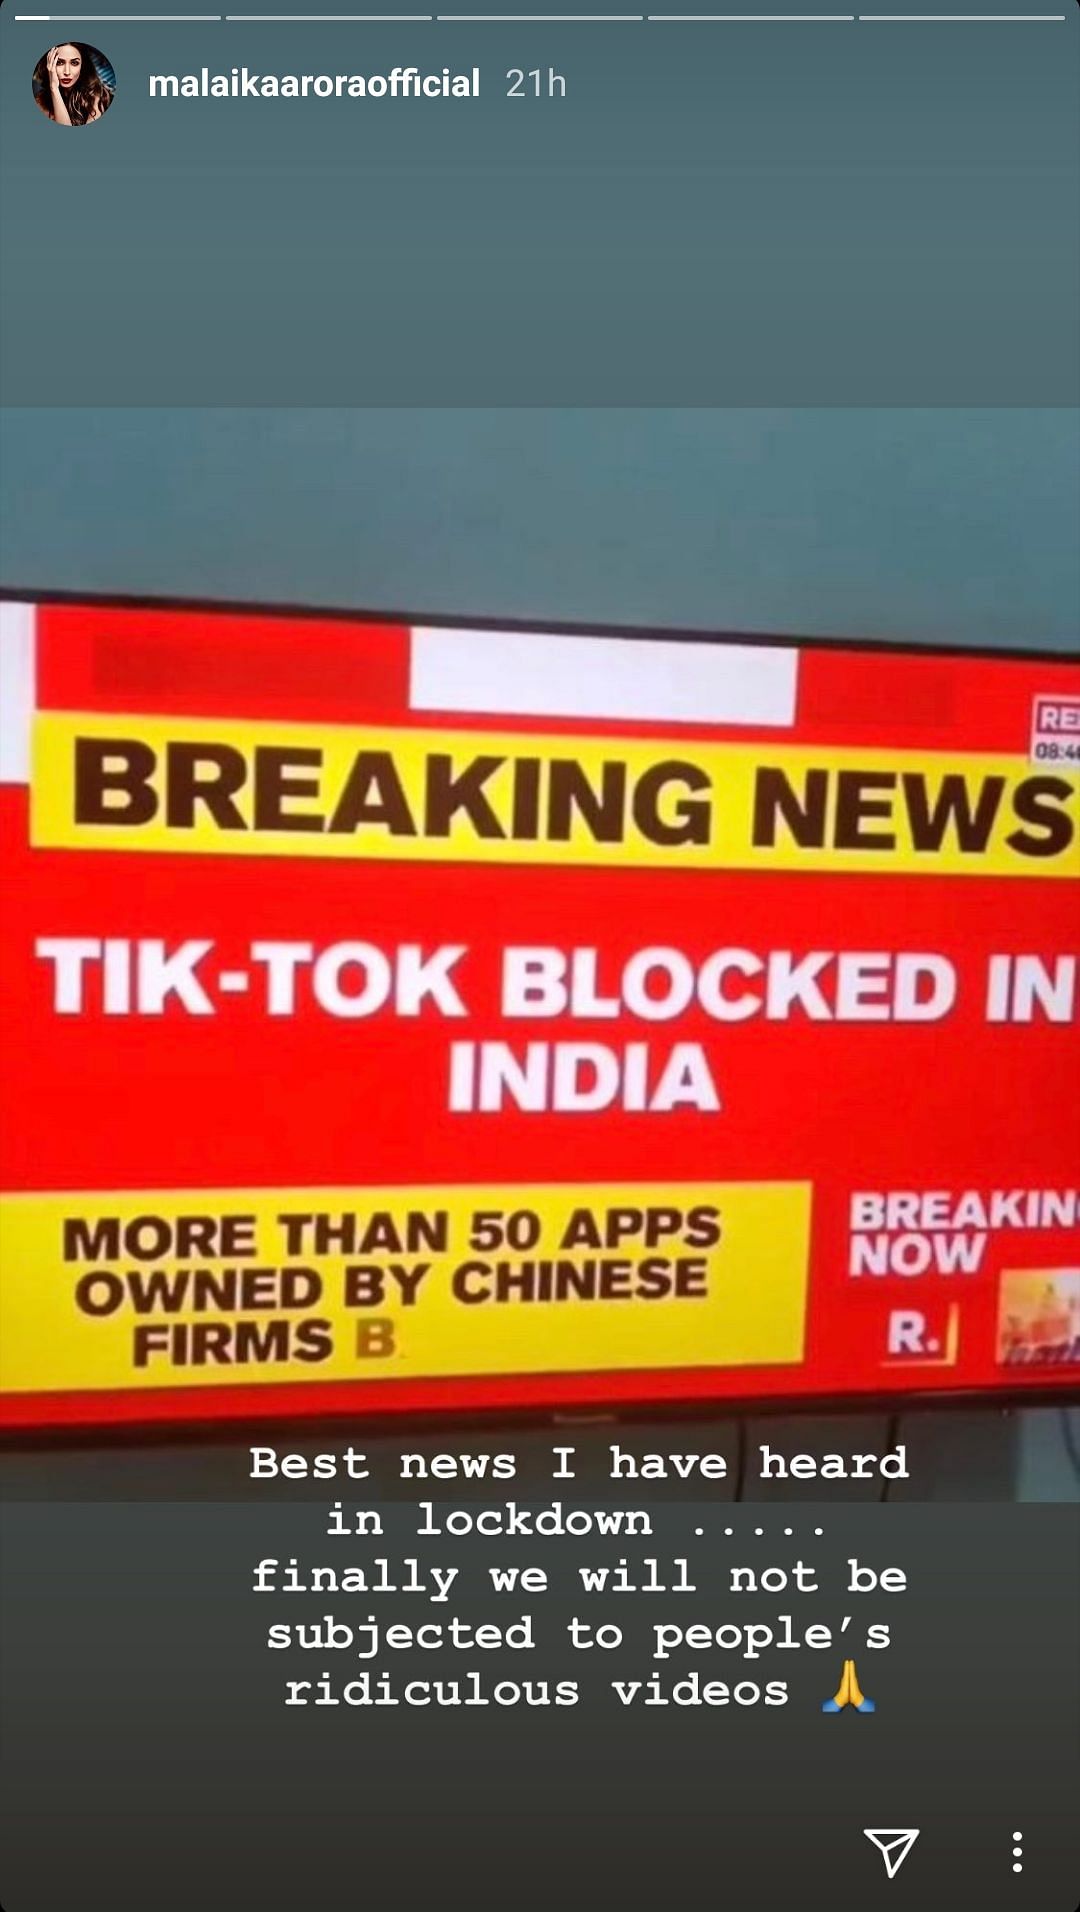 With over 200 million users, TikTok considers India to be its largest international market. 